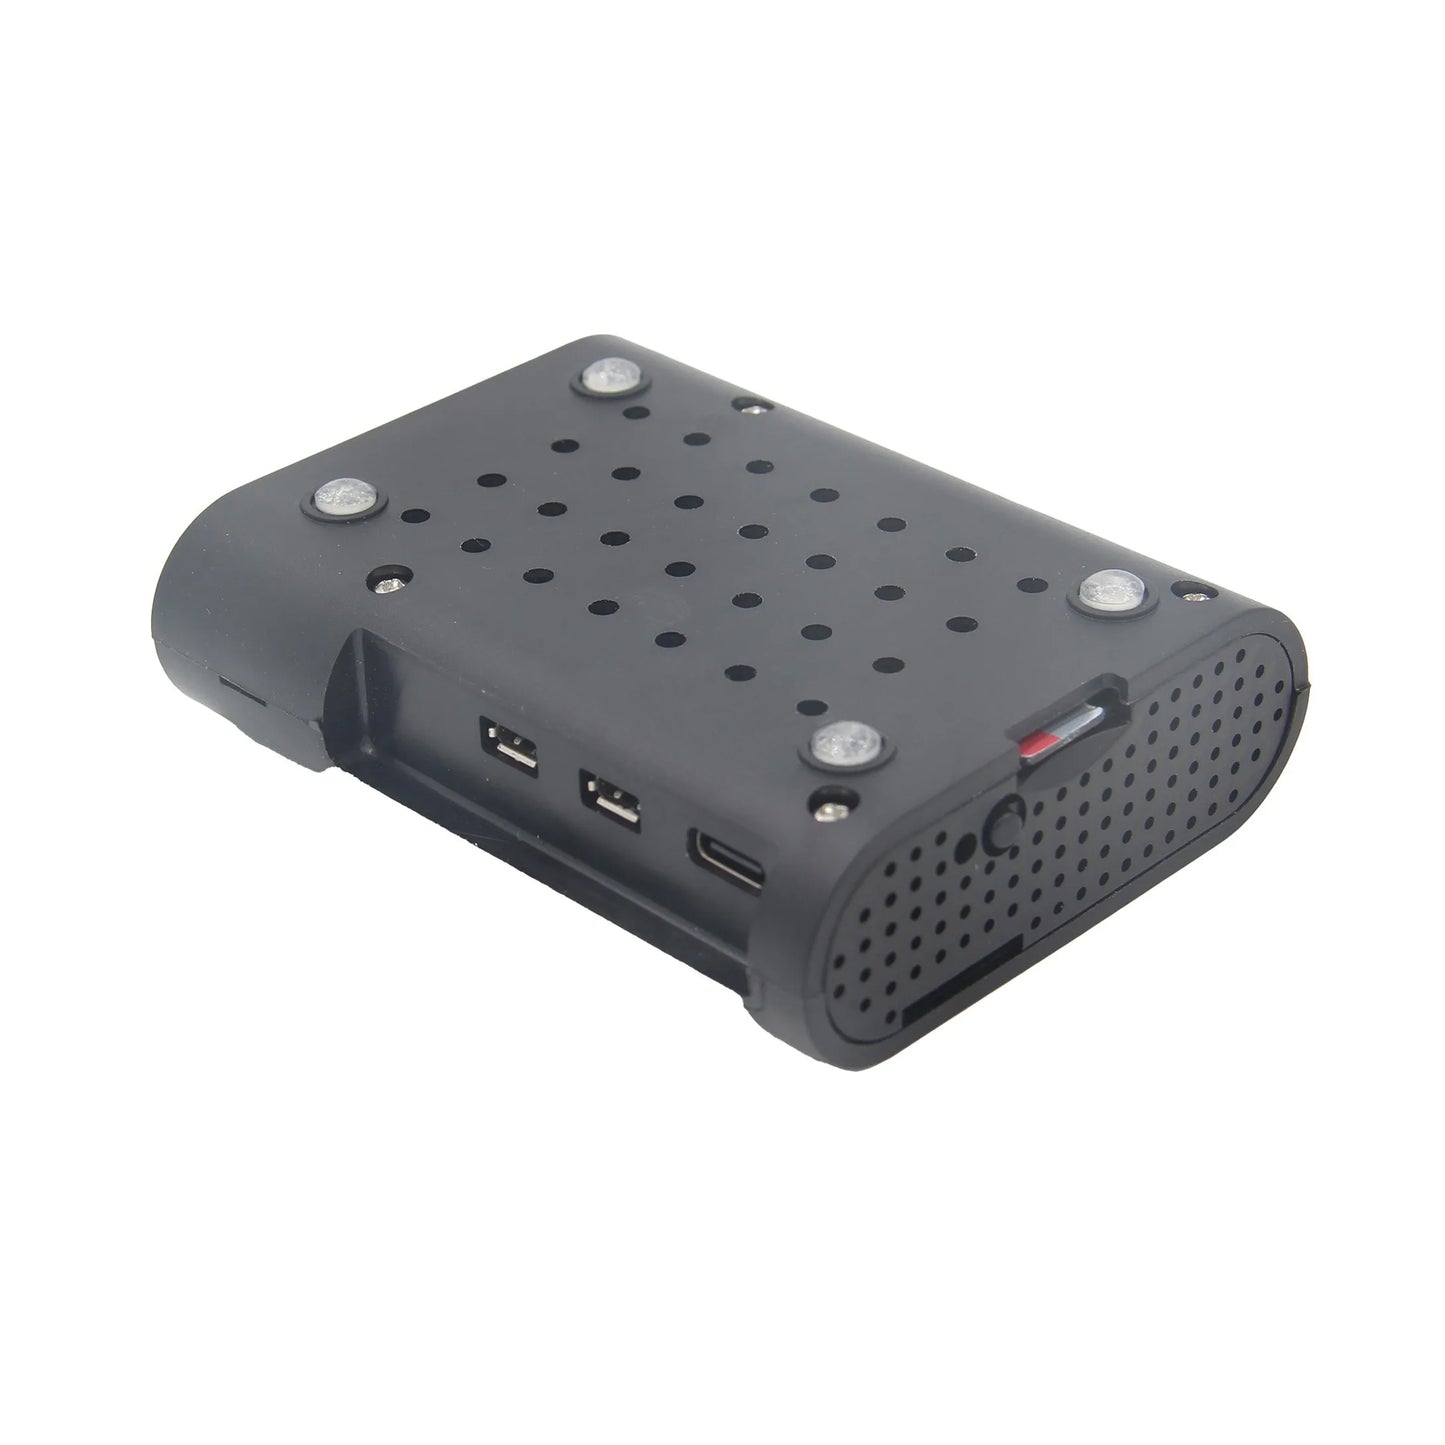 Raspberry Pi 5 ABS Case Raspberry Pi 5 Plastic Shell Compatible with Raspberry Pi 5 4GB, 8GB - Black - RS5761 - REES52